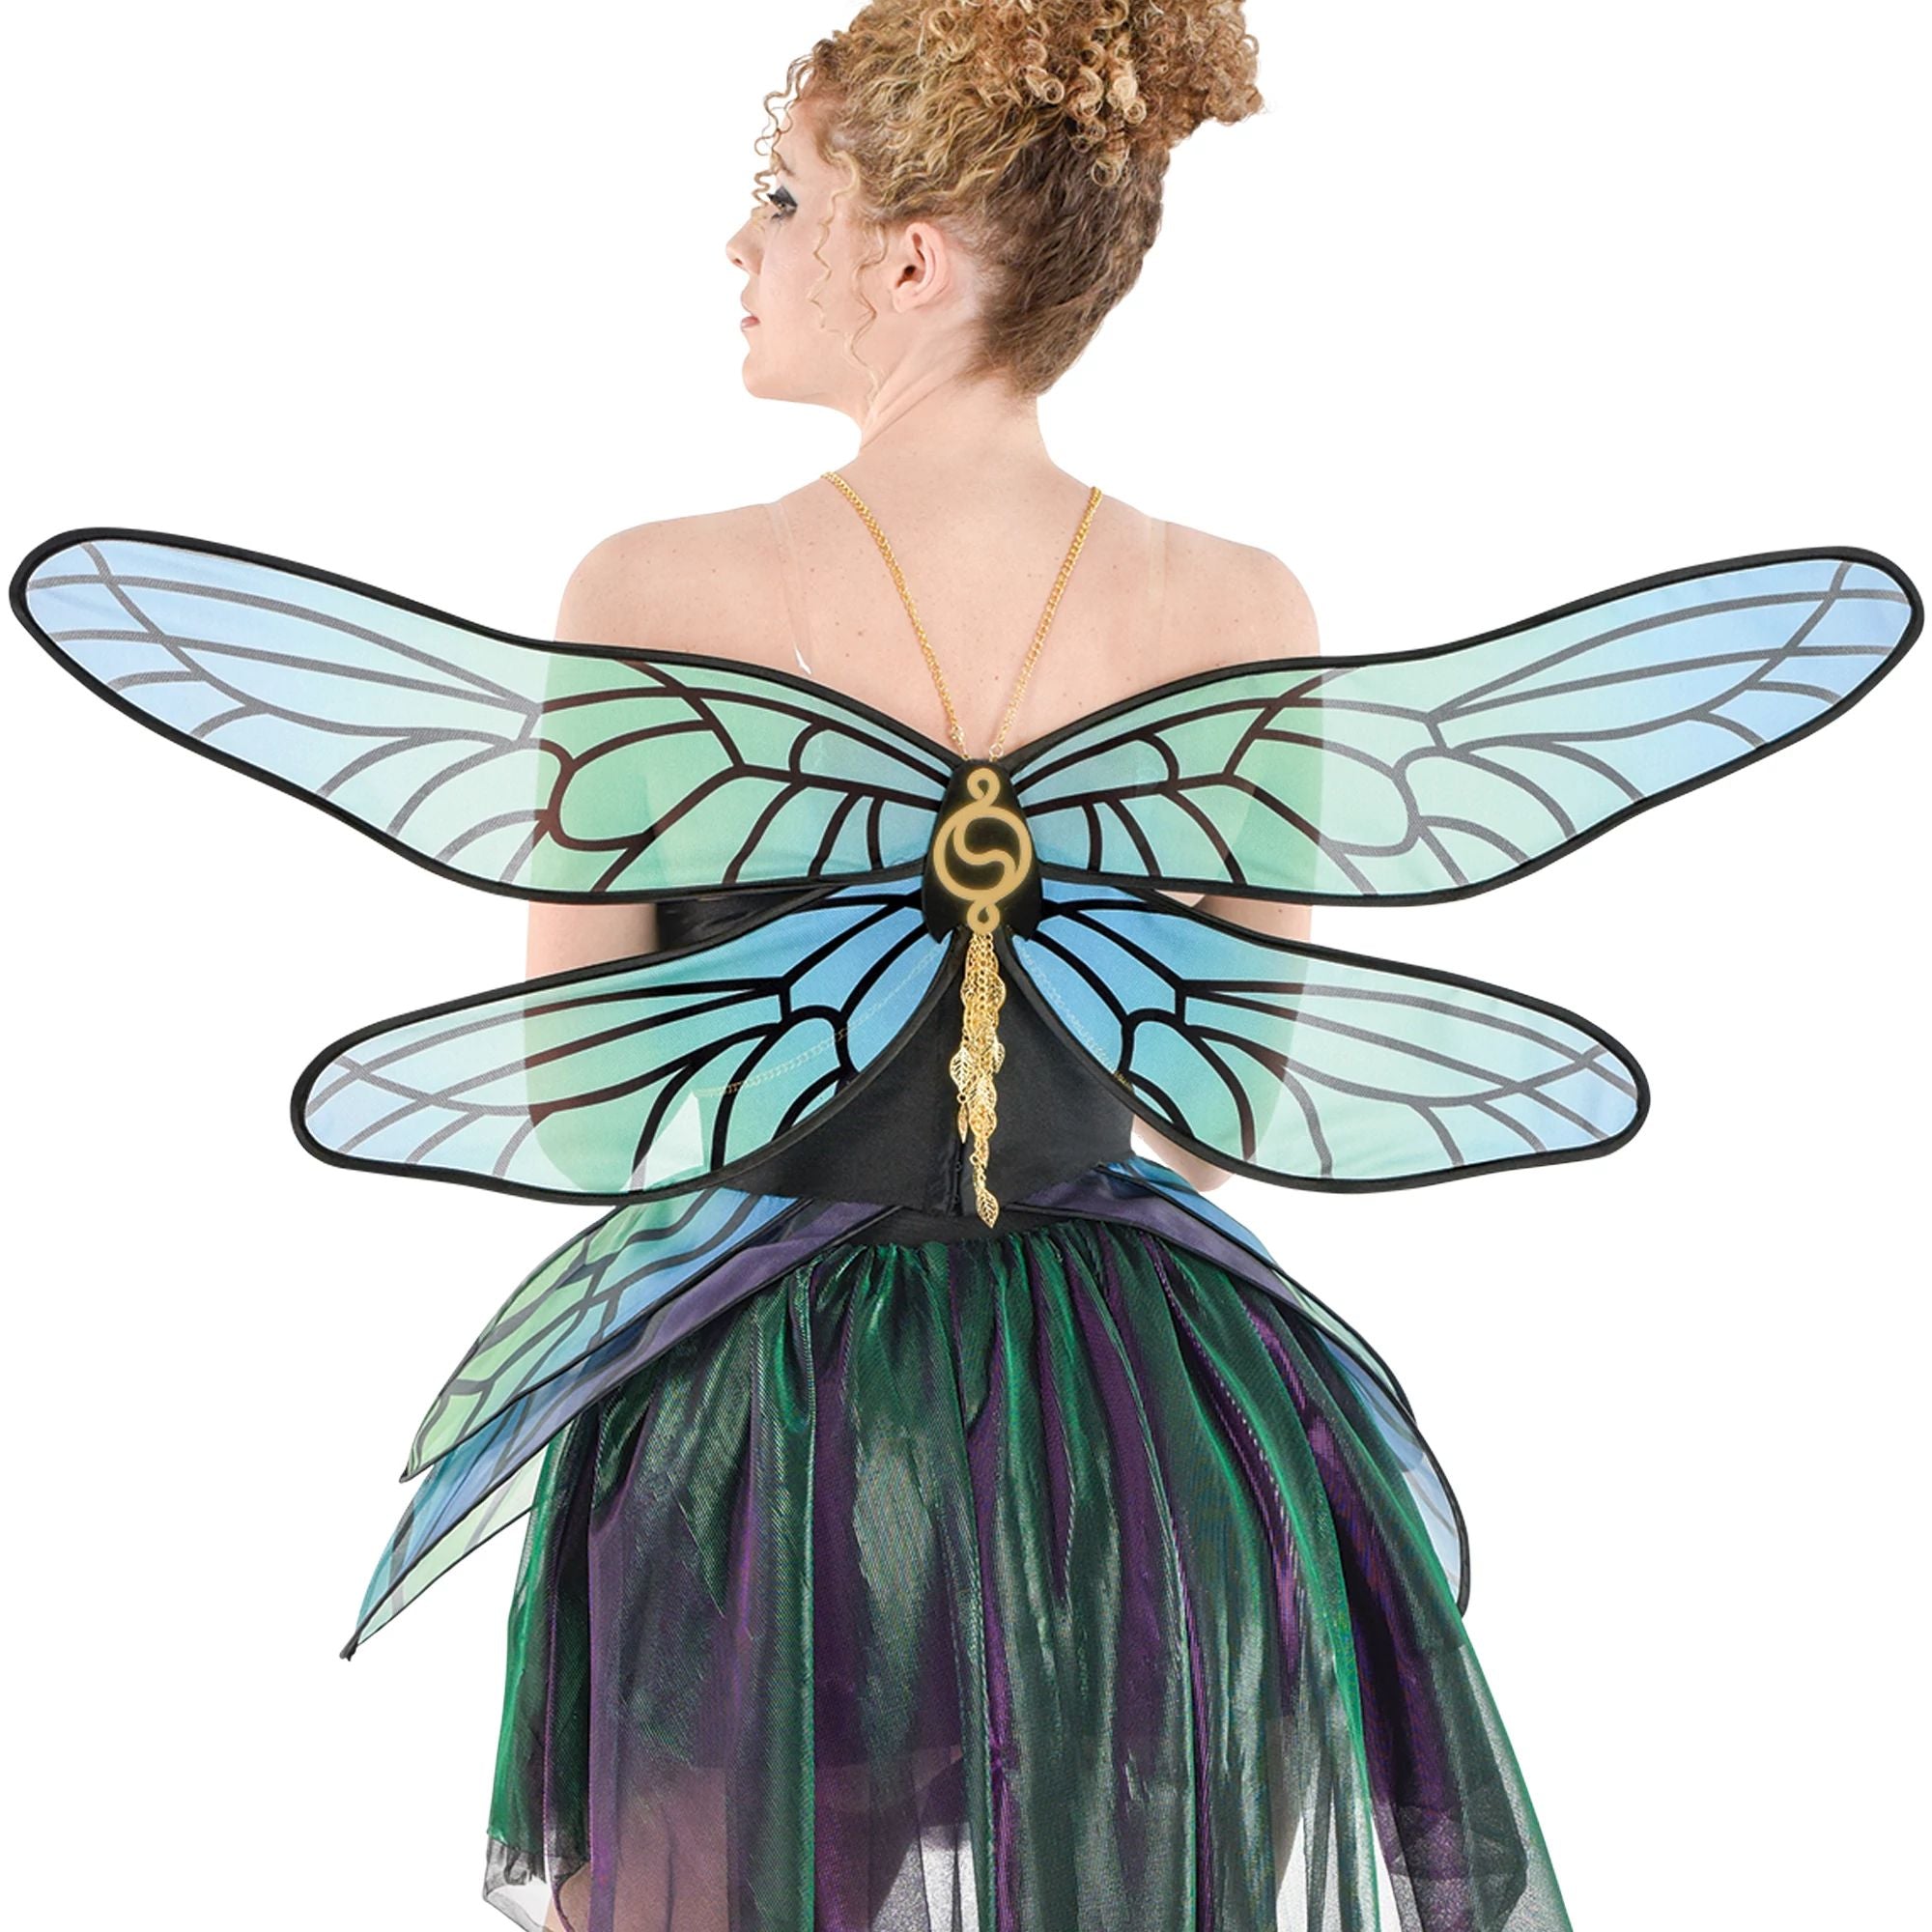 Amscan COSTUMES: ACCESSORIES Body Chain Insect Wings